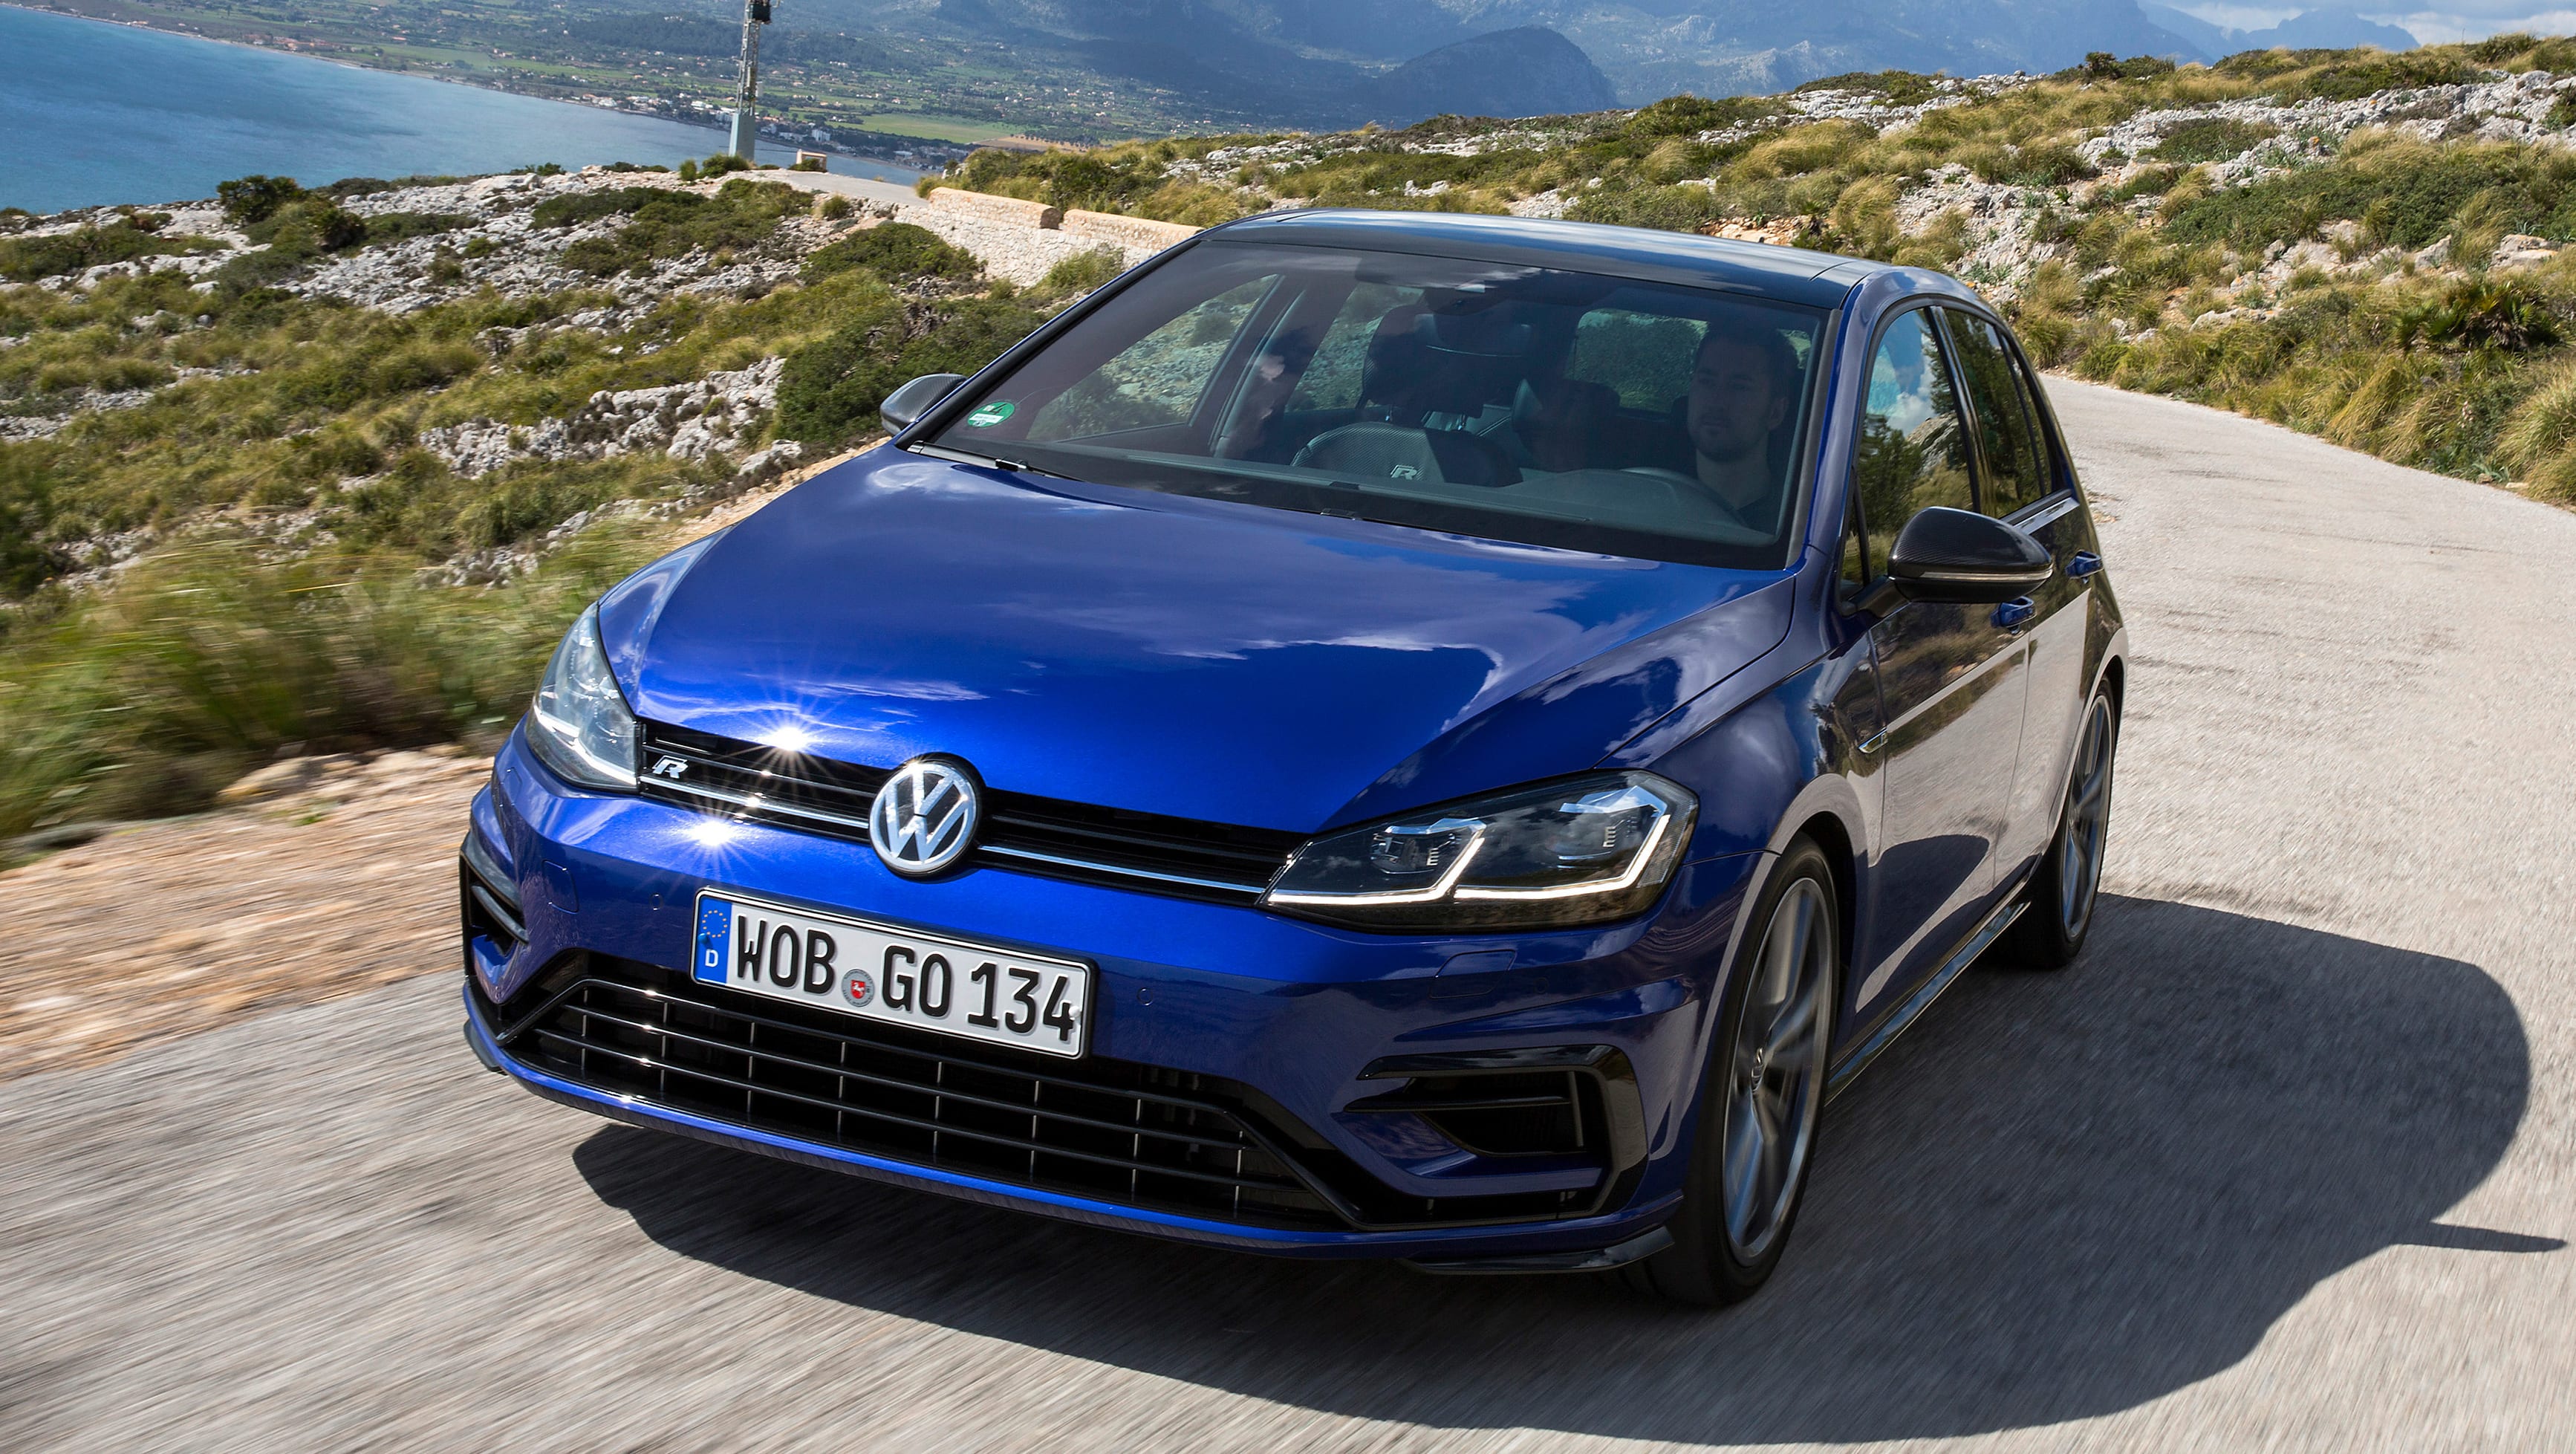 Golf R 0-100: Top Speed & Acceleration Confirmed